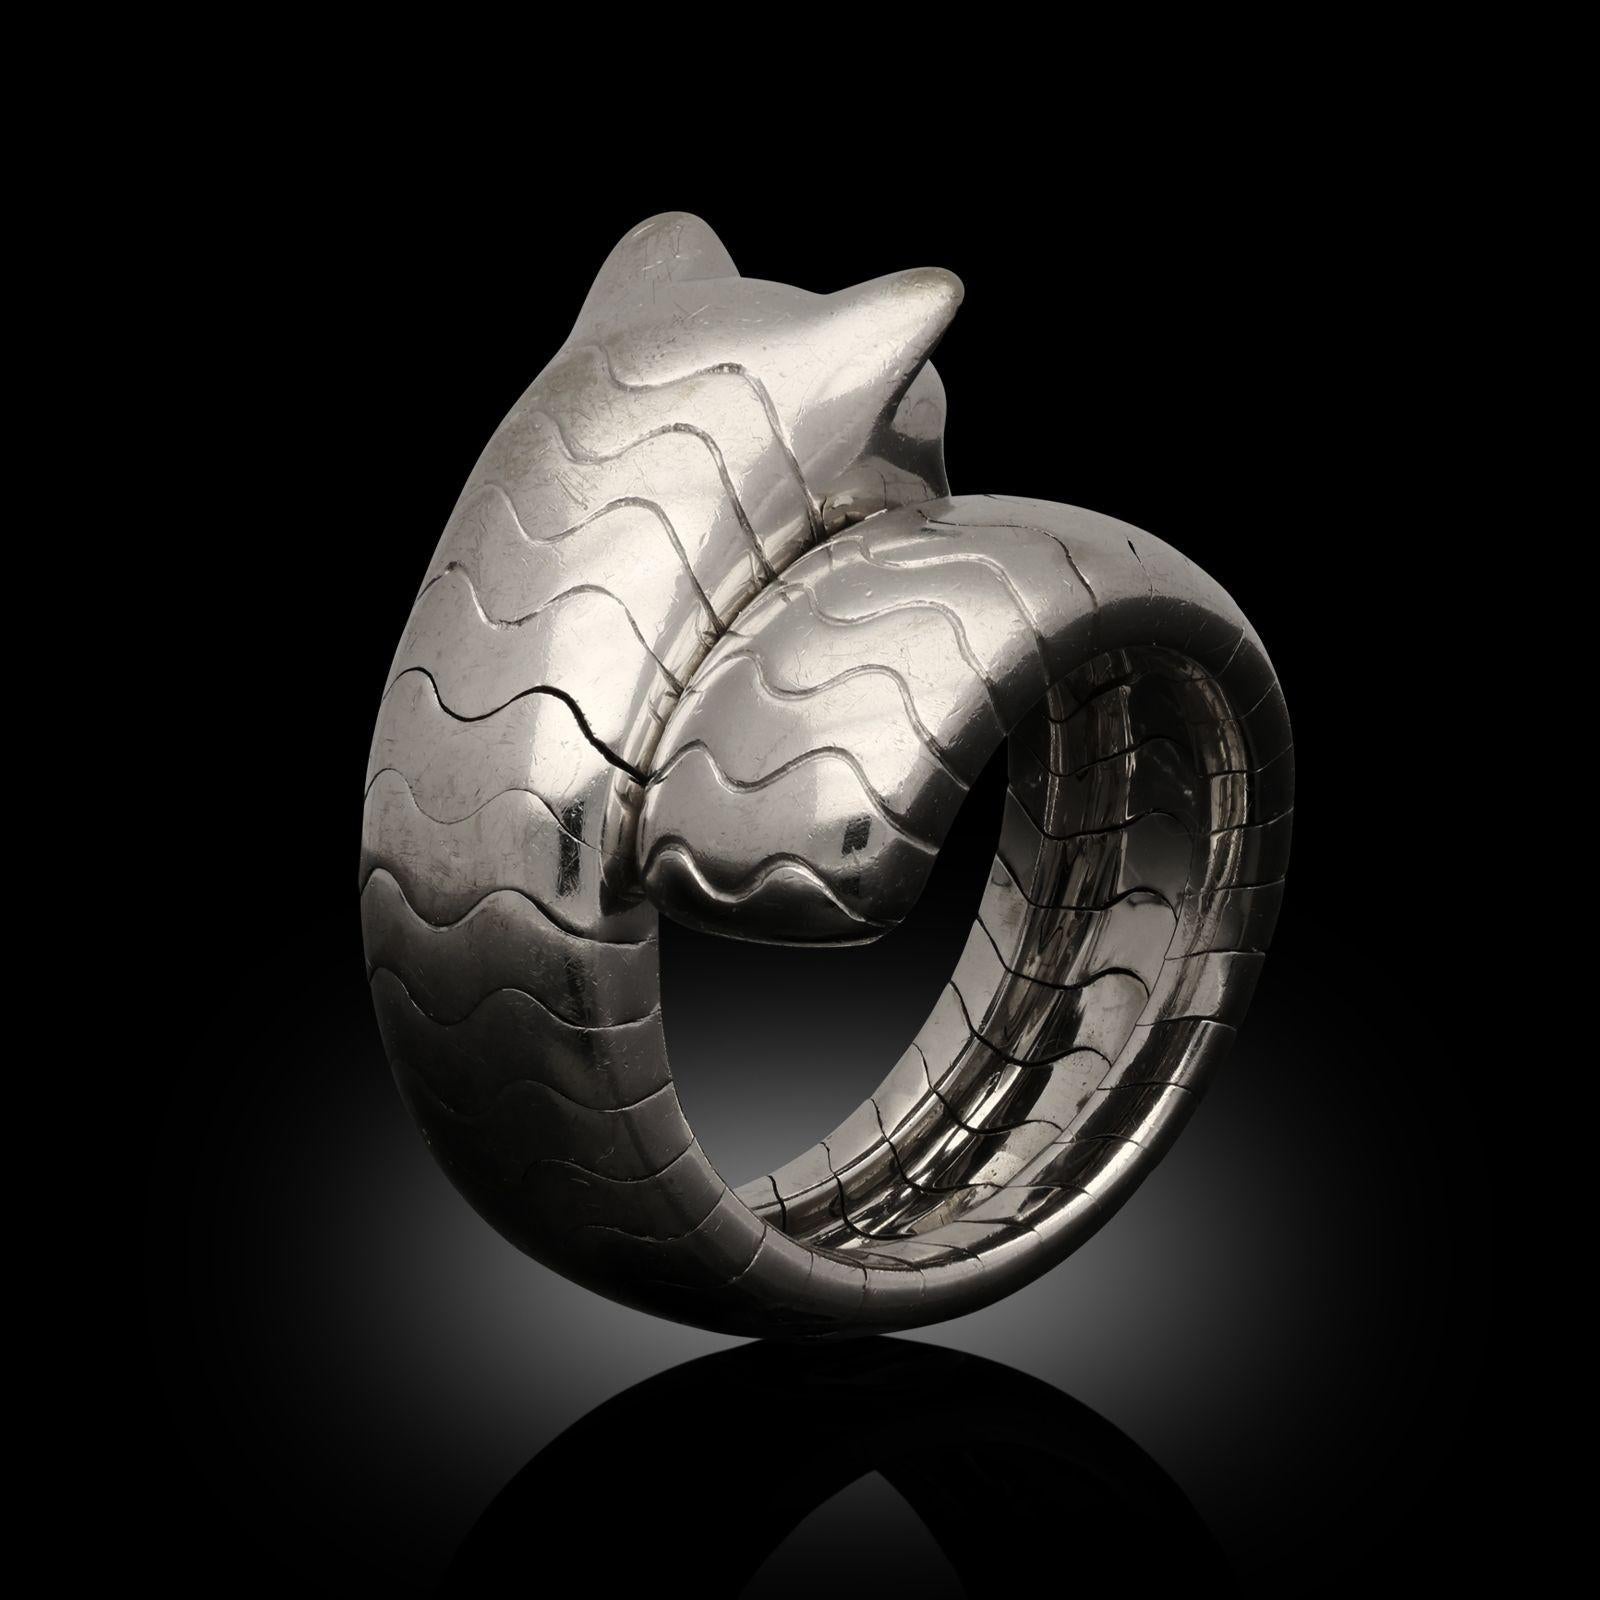 An 18ct white gold Panthère ring by Cartier, circa 2000s from the ‘Panthère Lakarda’ collection. The panther’s stylised design wraps around the finger and the wide band is lightly sprung to fit comfortably and can accommodate more finger sizes. The